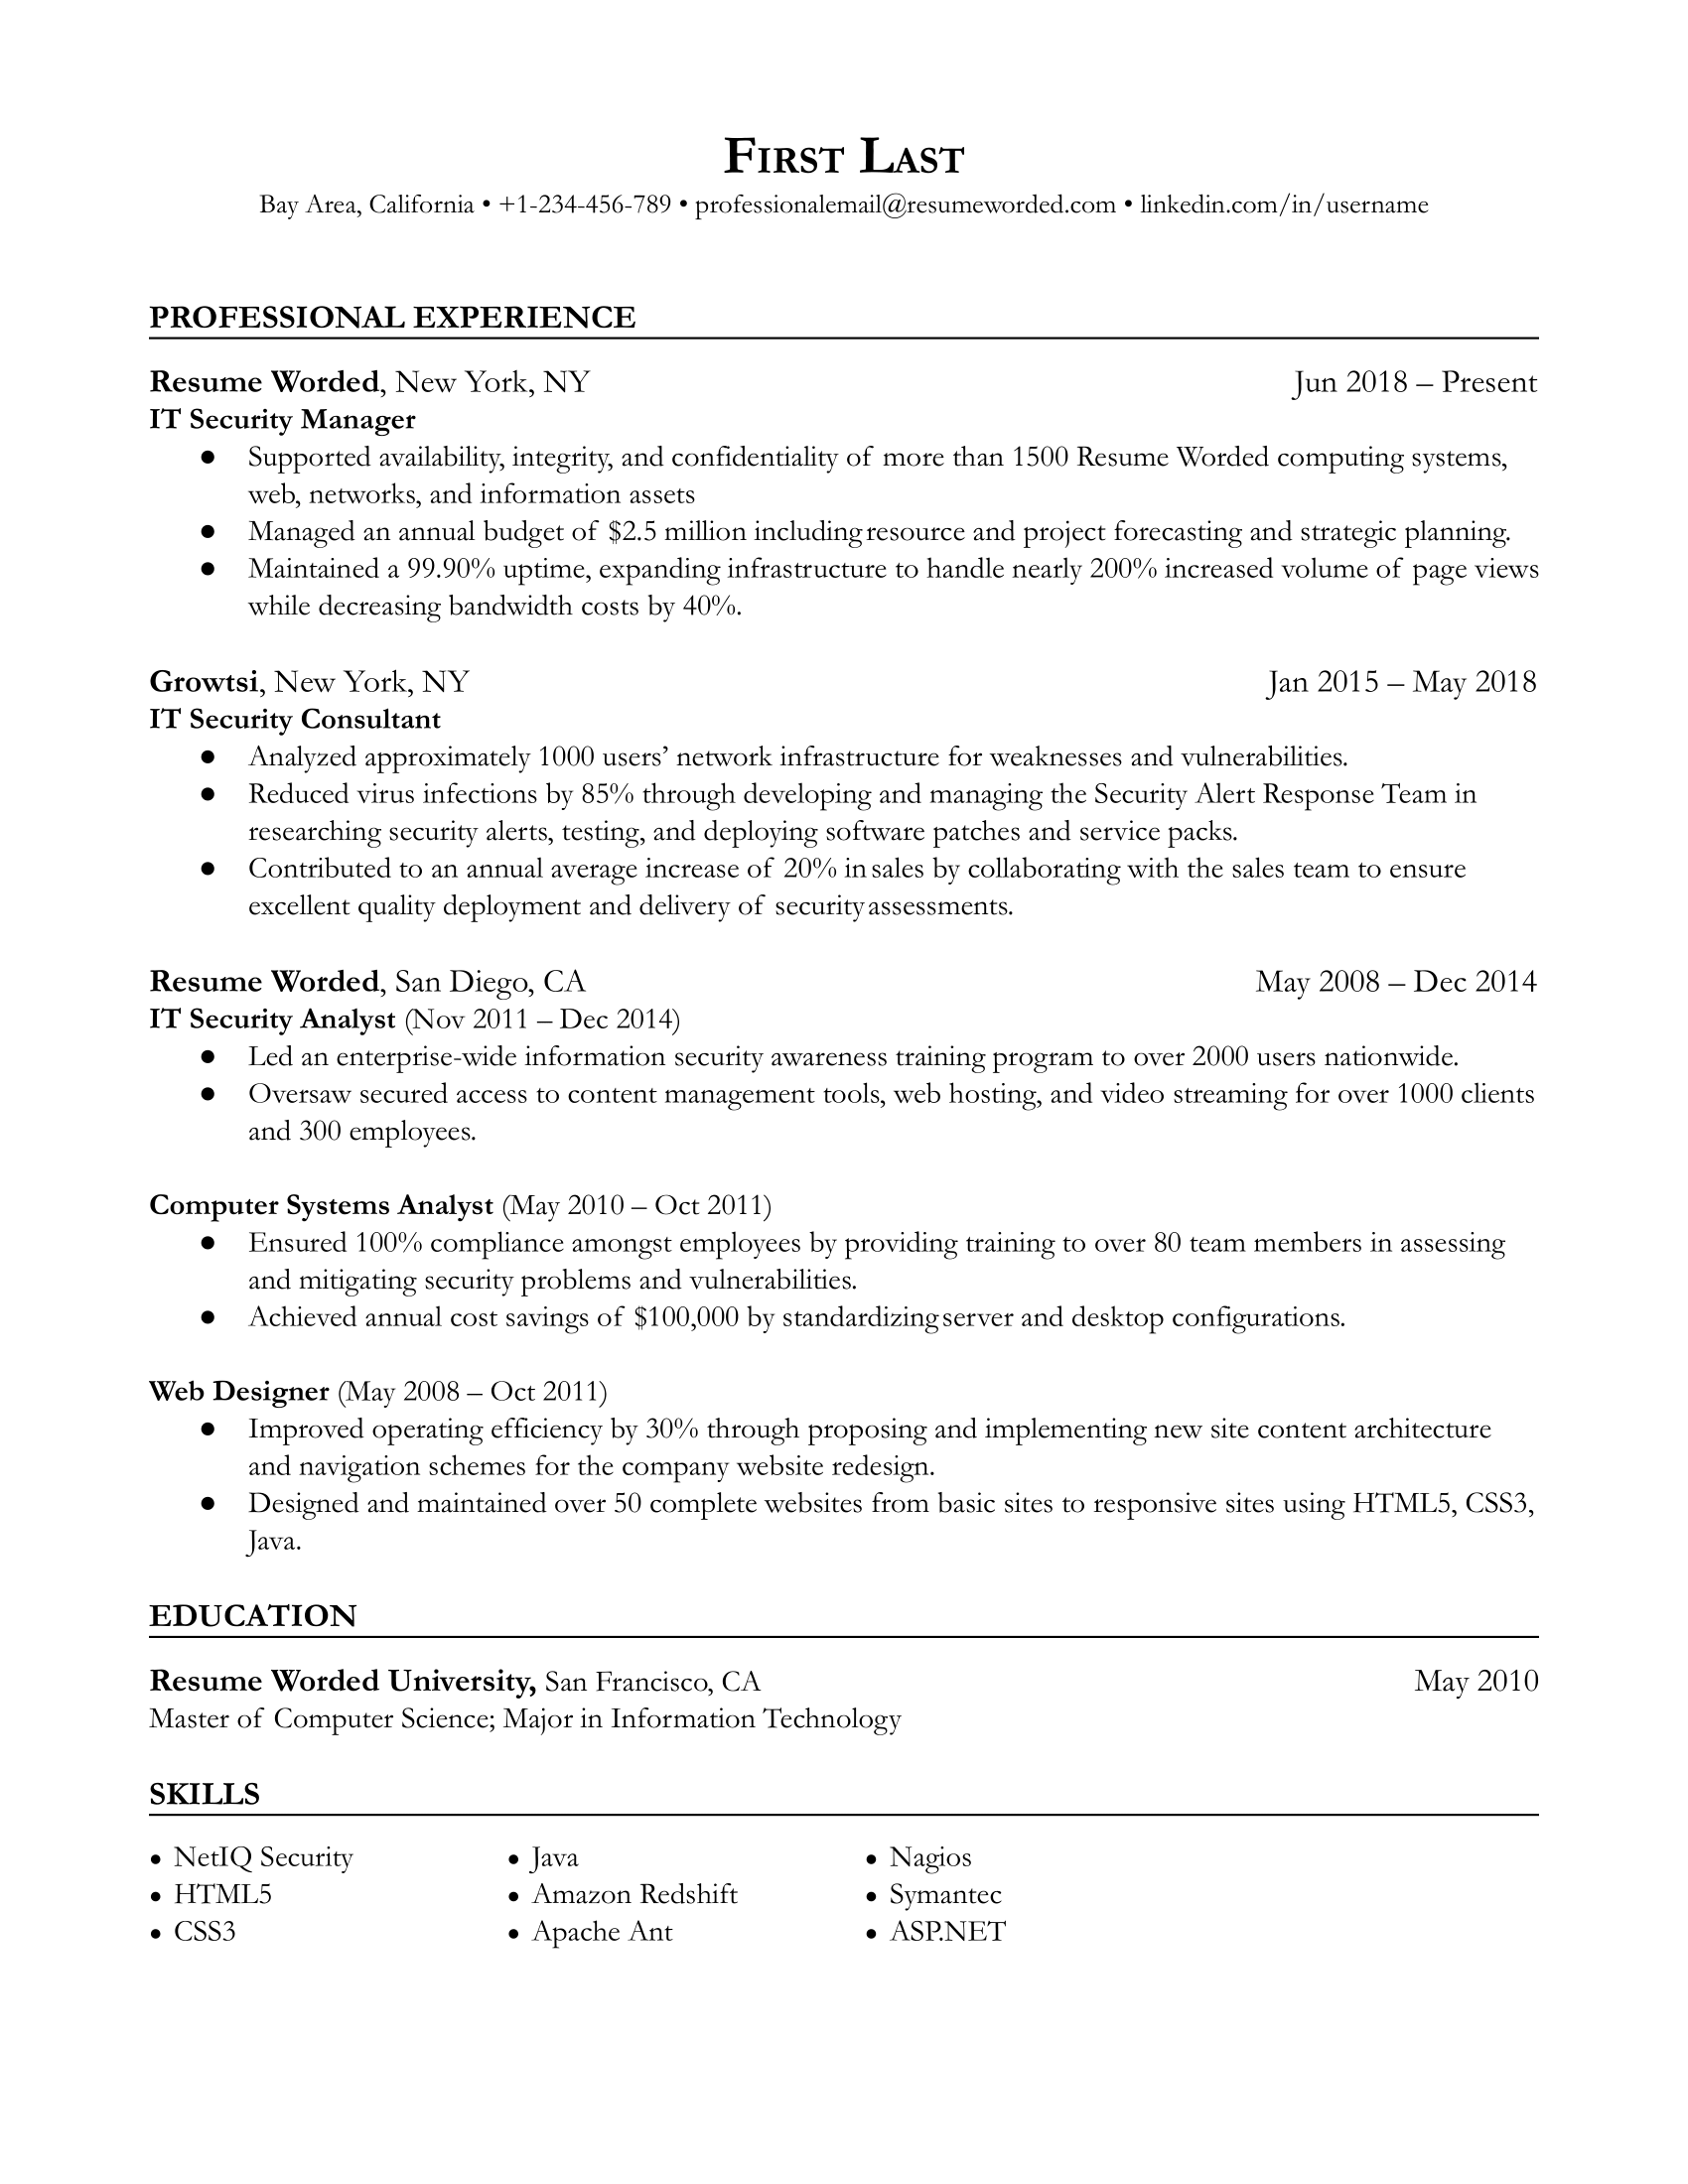 IT Security Manager Resume Sample